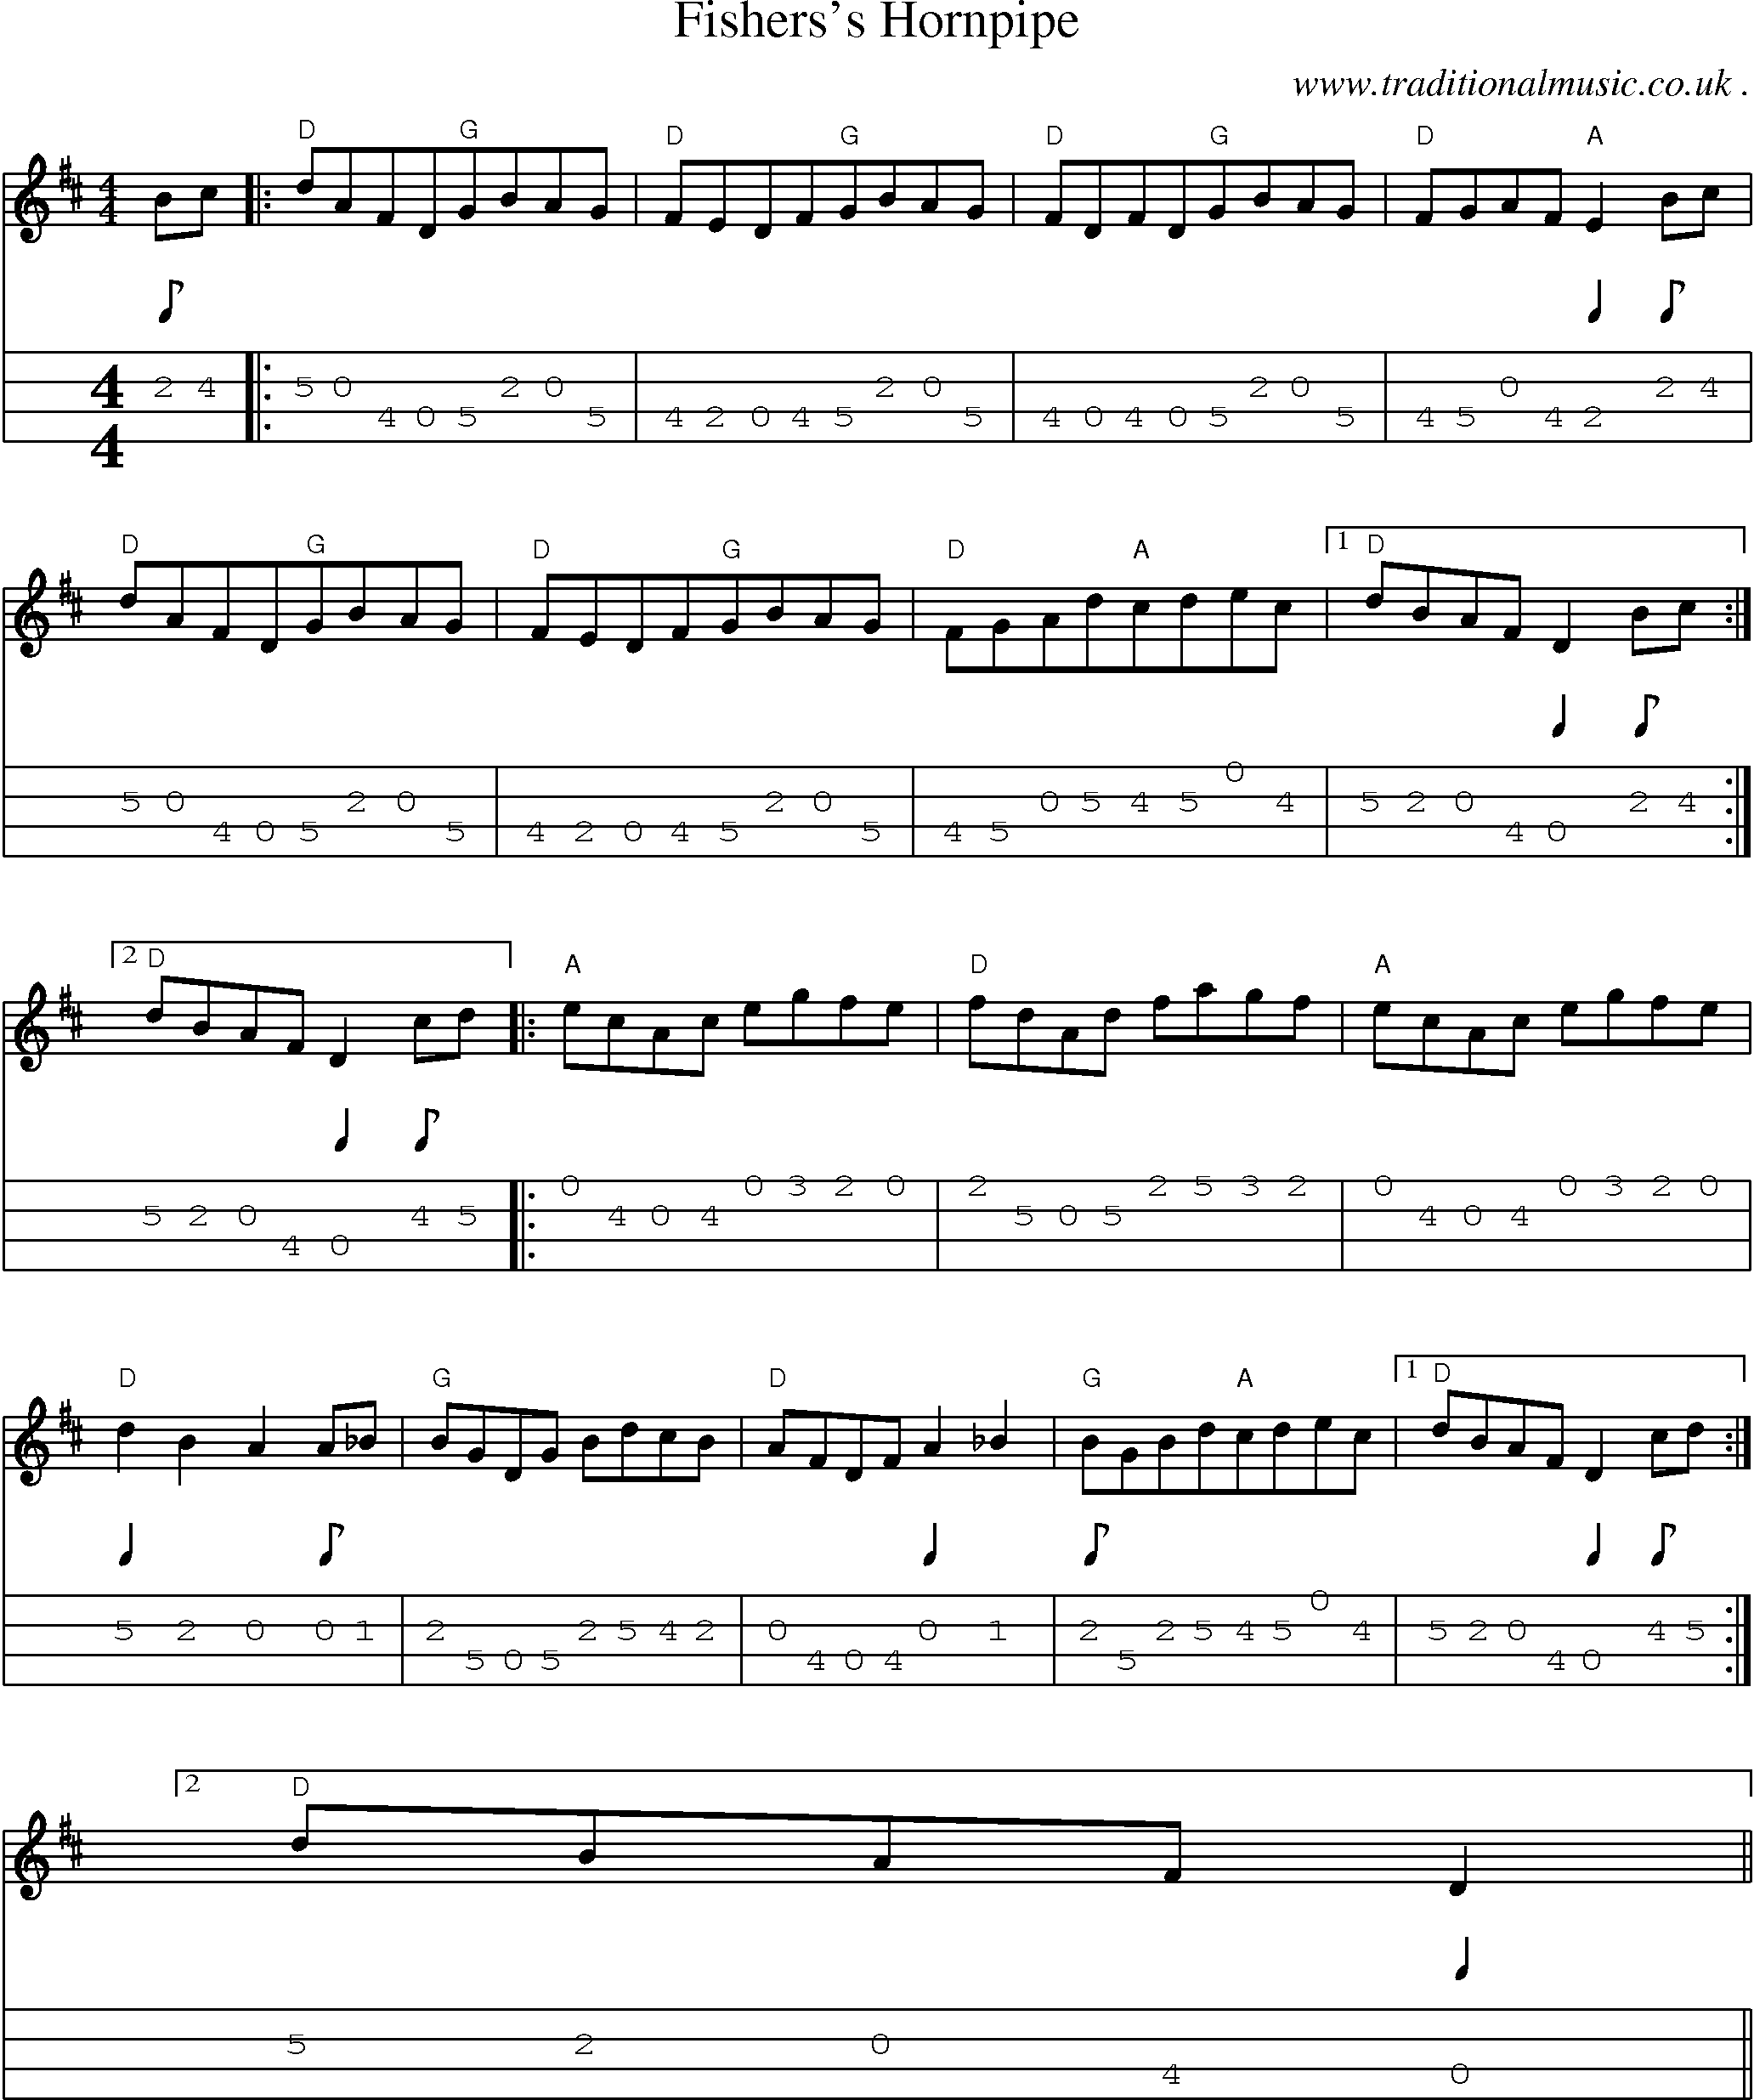 Sheet-Music and Mandolin Tabs for Fisherss Hornpipe